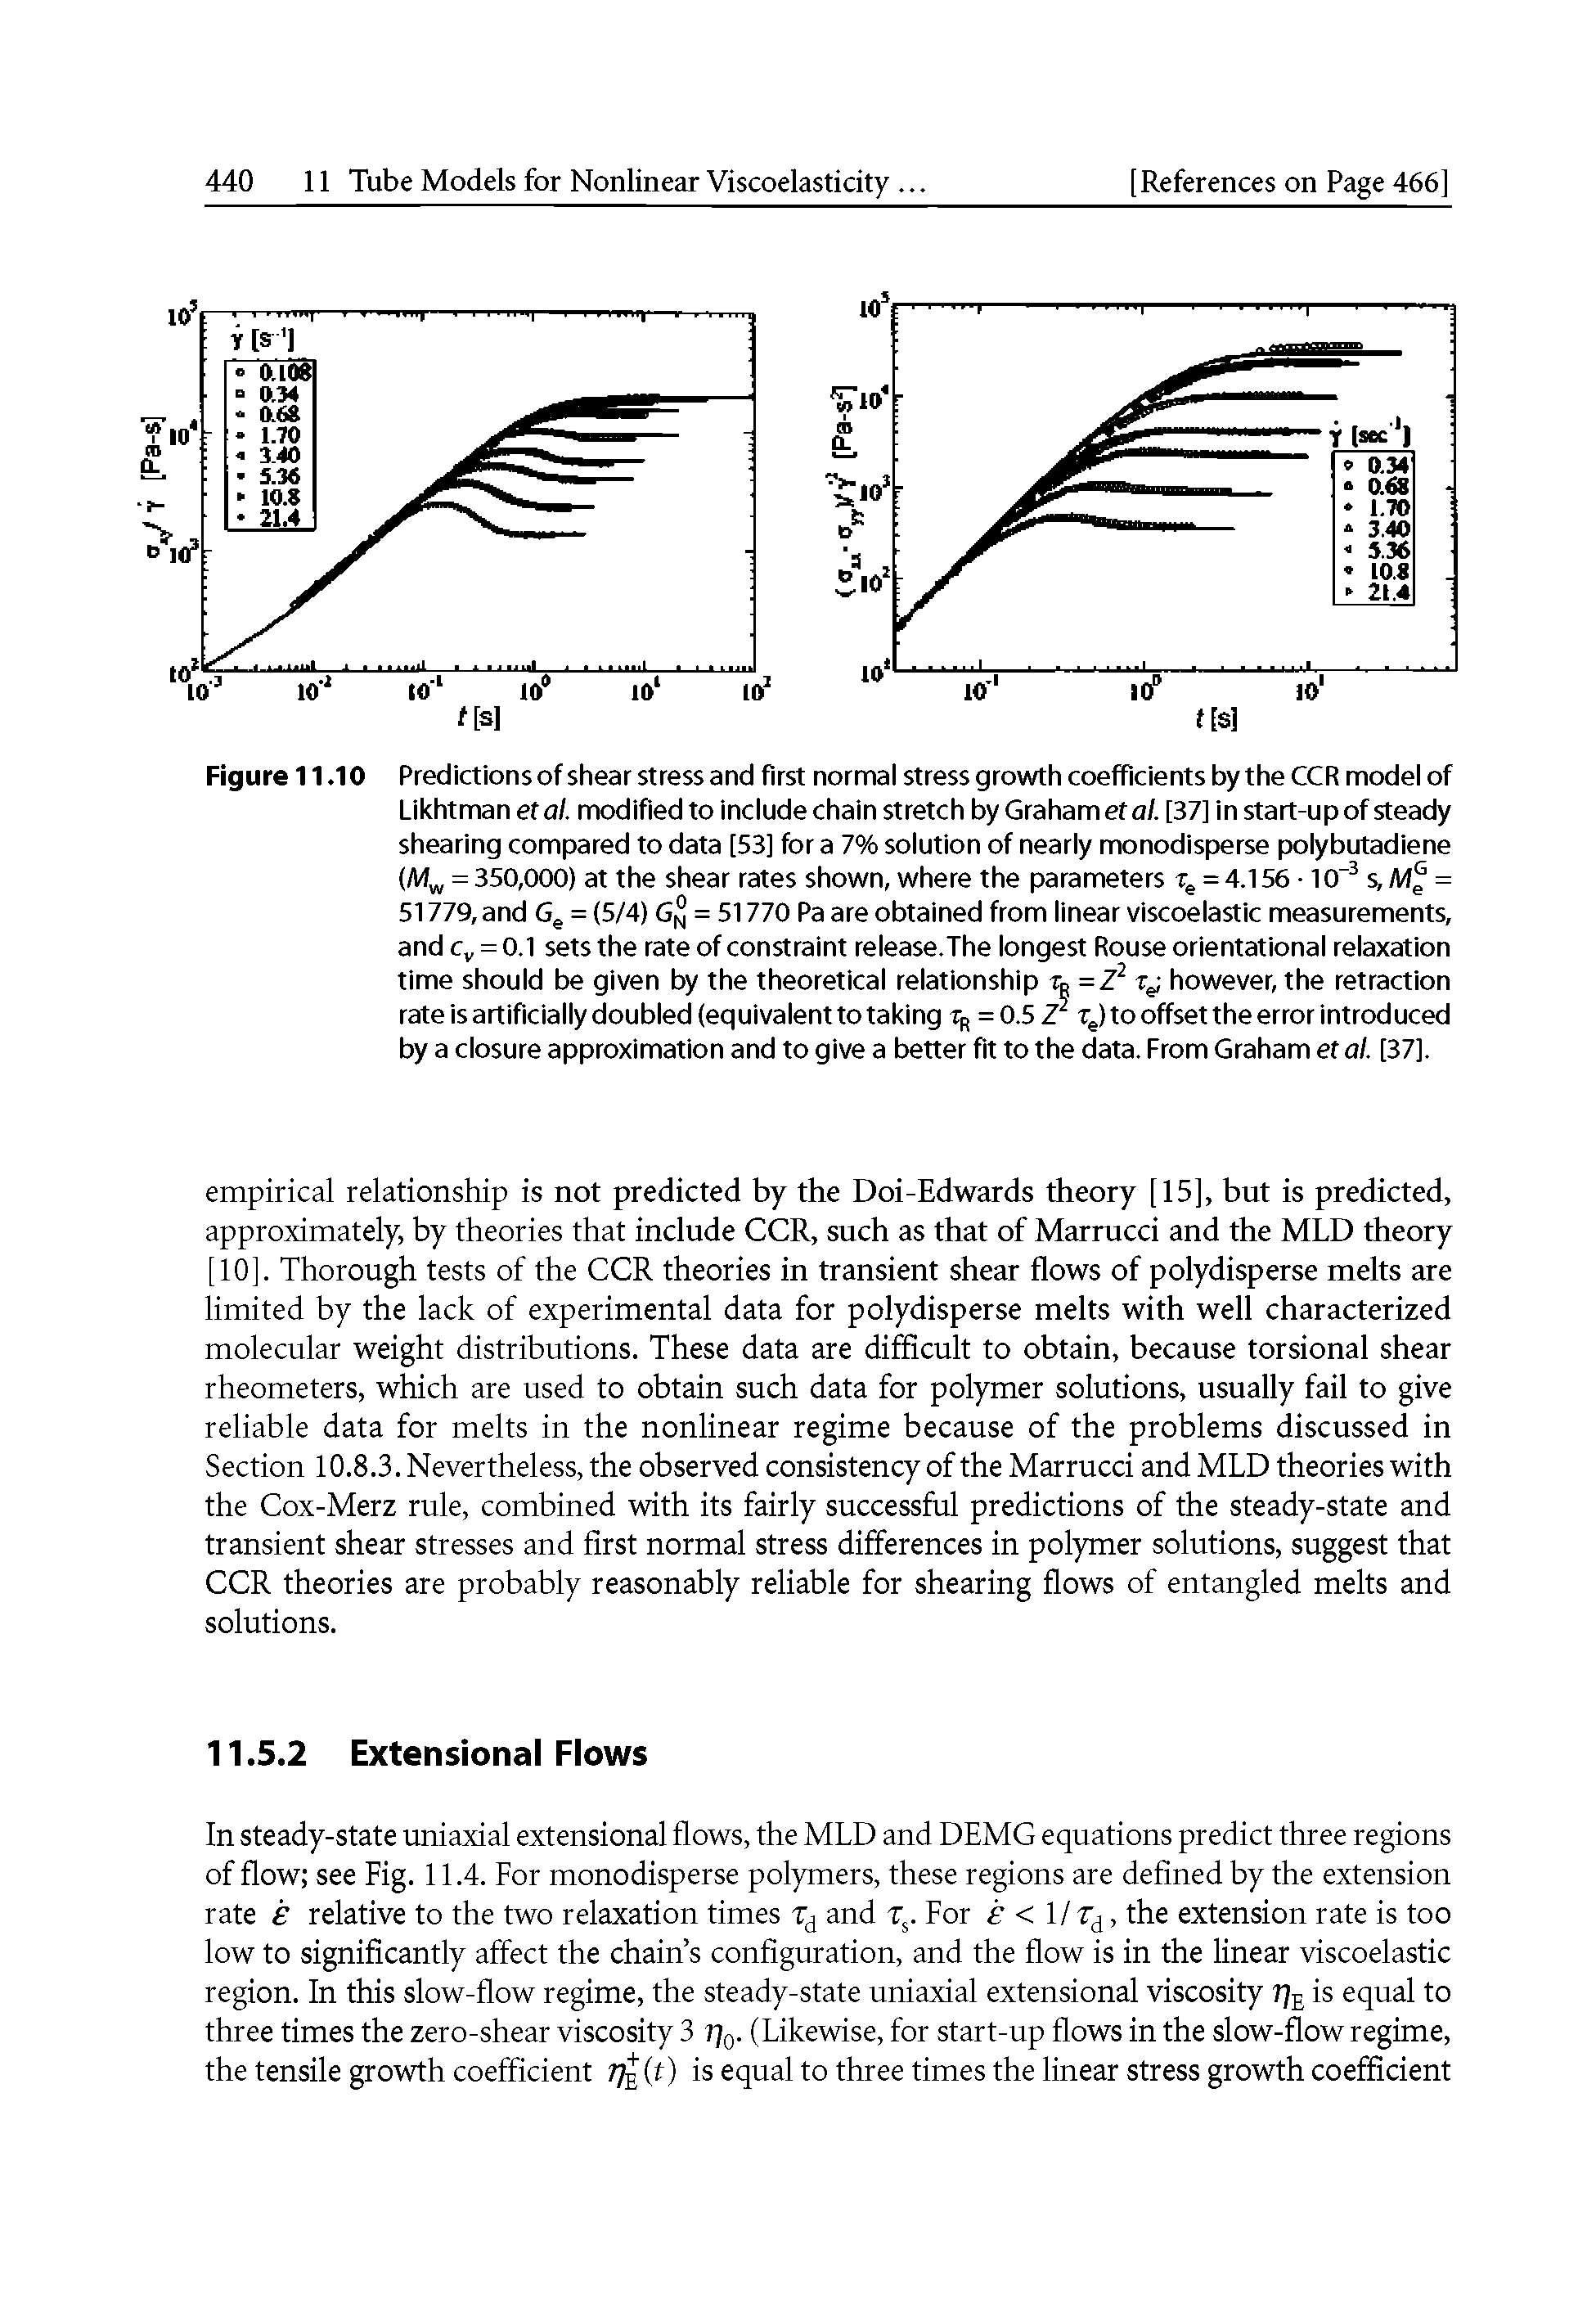 Figure 11.10 Predictions of shear stress and first normal stress growth coefficients by the CCR model of Likhtman etal. modified to include chain stretch by Graham eta/. [37] in start-up of steady shearing compared to data [53] for a 7% solution of nearly monodisperse polybutadiene (M = 350,000) at the shear rates shown, where the parameters = 4.156 -10" s,M = 51779, and Gg = (5/4) G 5 = 51770 Pa are obtained from linear viscoelastic measurements, and = 0.1 sets the rate of constraint release.The longest Rouse orientational relaxation time should be given by the theoretical relationship to =Z however, the retraction rate is artificially doubled (equivalent to taking xj, =0.5 Z T )tooffsetthe error introduced by a closure approximation and to give a better fit to the data. From Graham et al. [37].